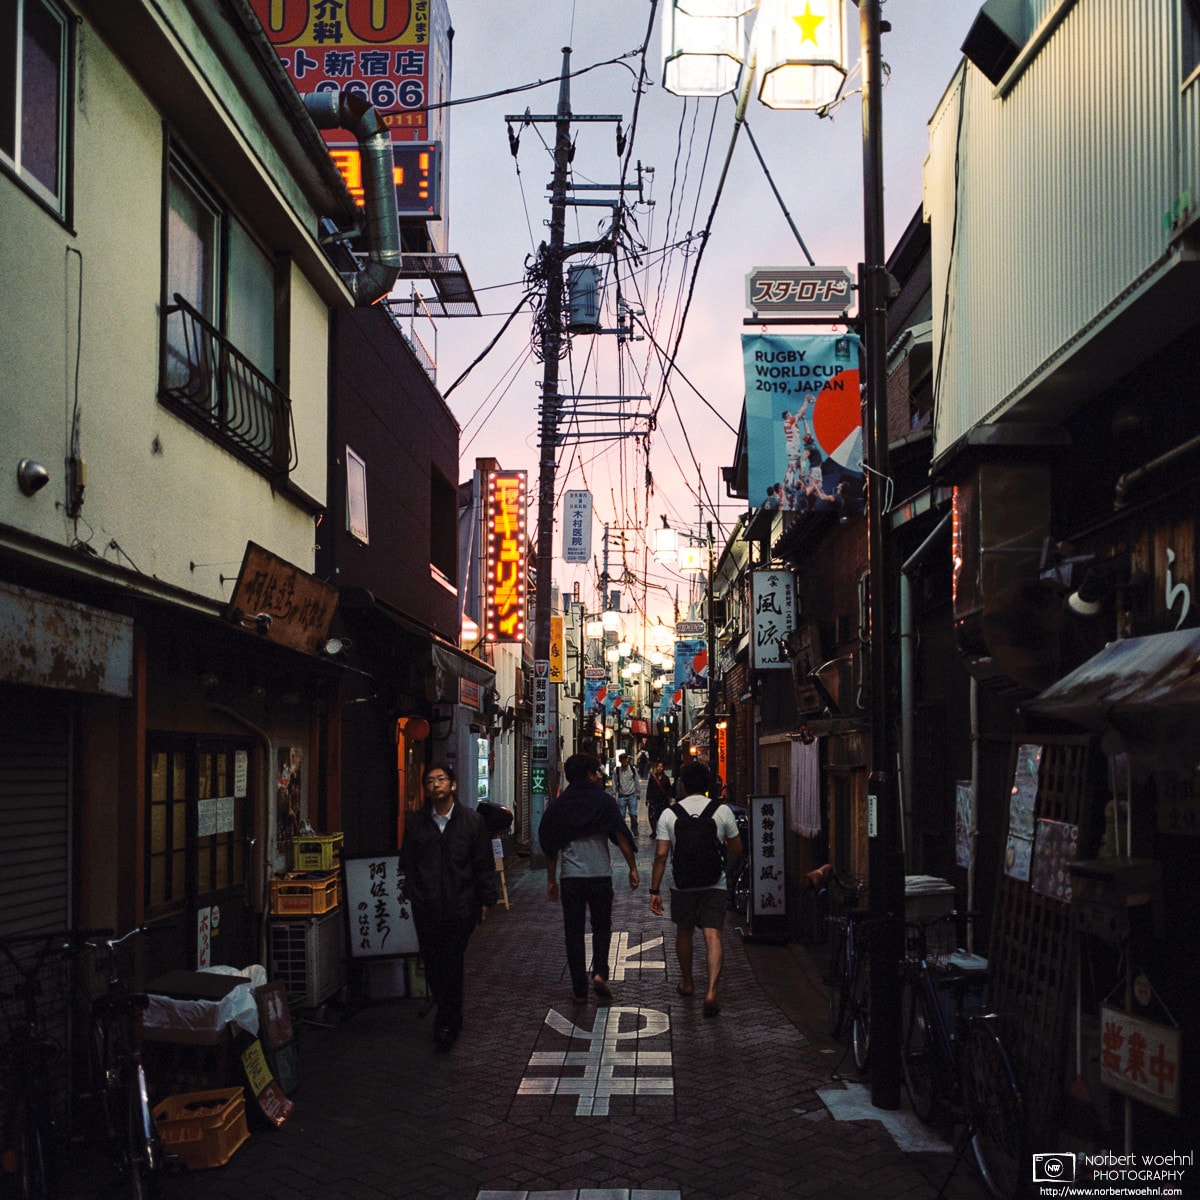 Star Road in the Asagaya area of Tokyo, Japan, is filled with small restaurants and drinking establishments.